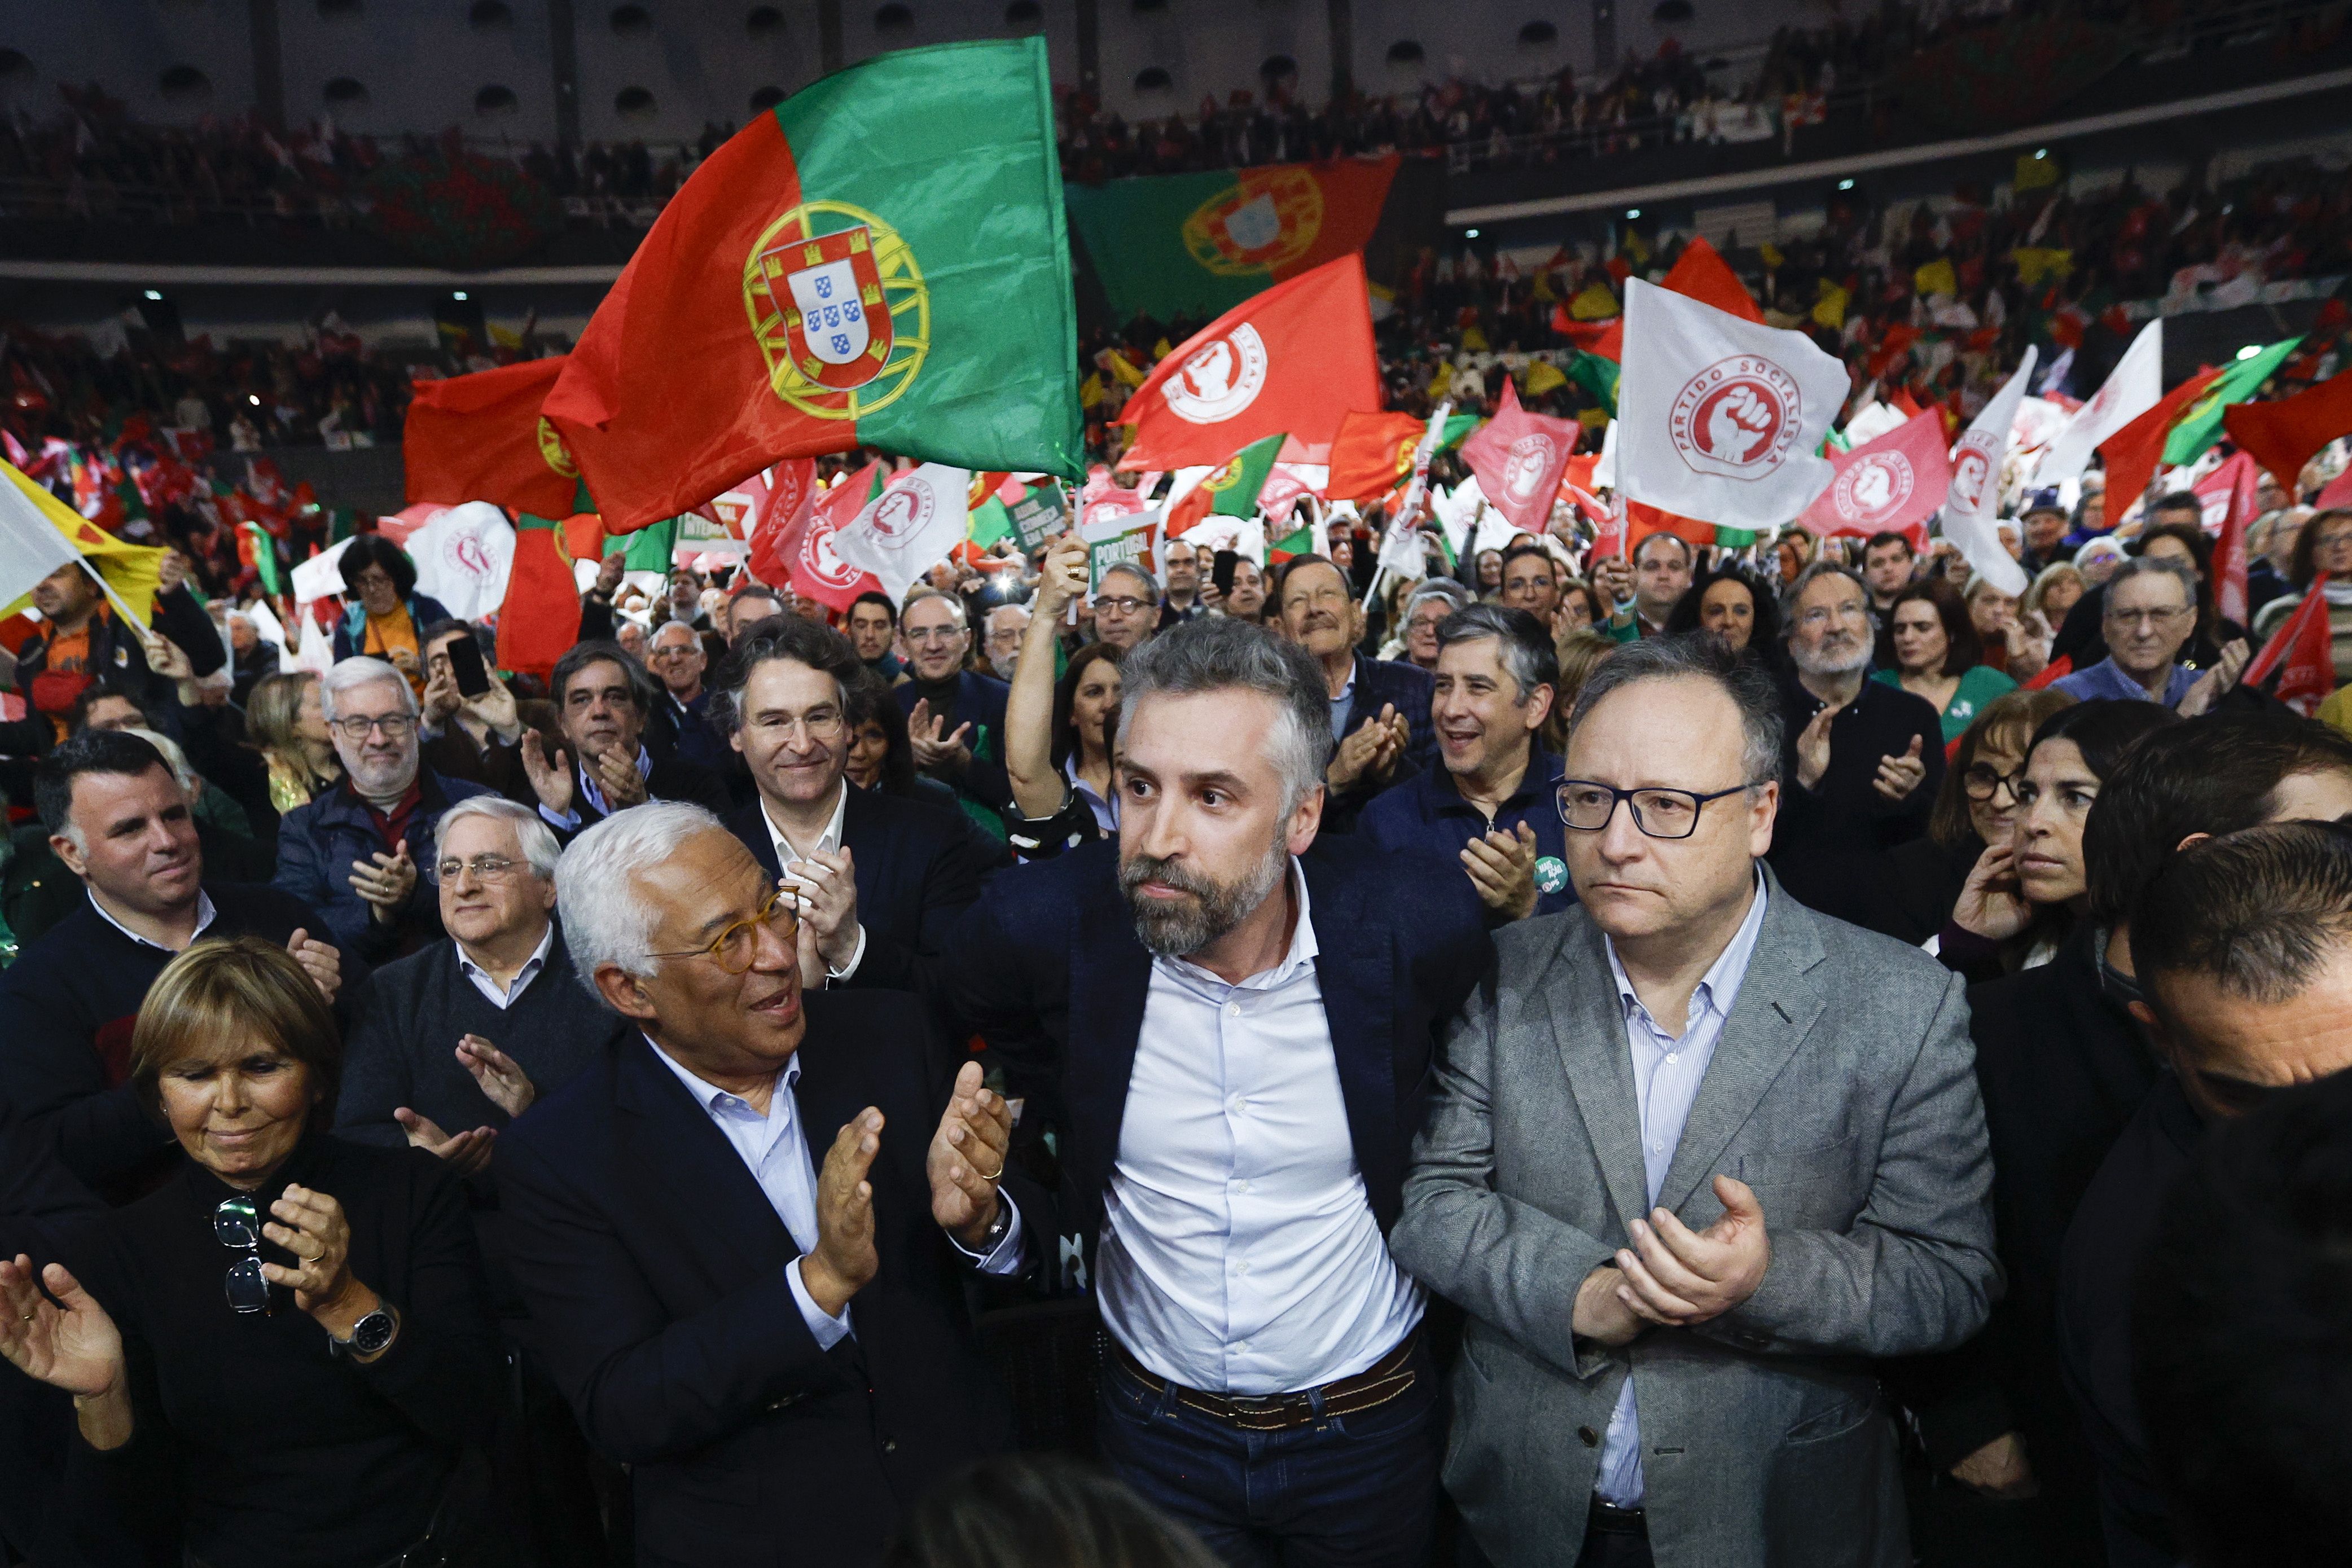 (ID_13663651) PORTUGAL ELECTIONS